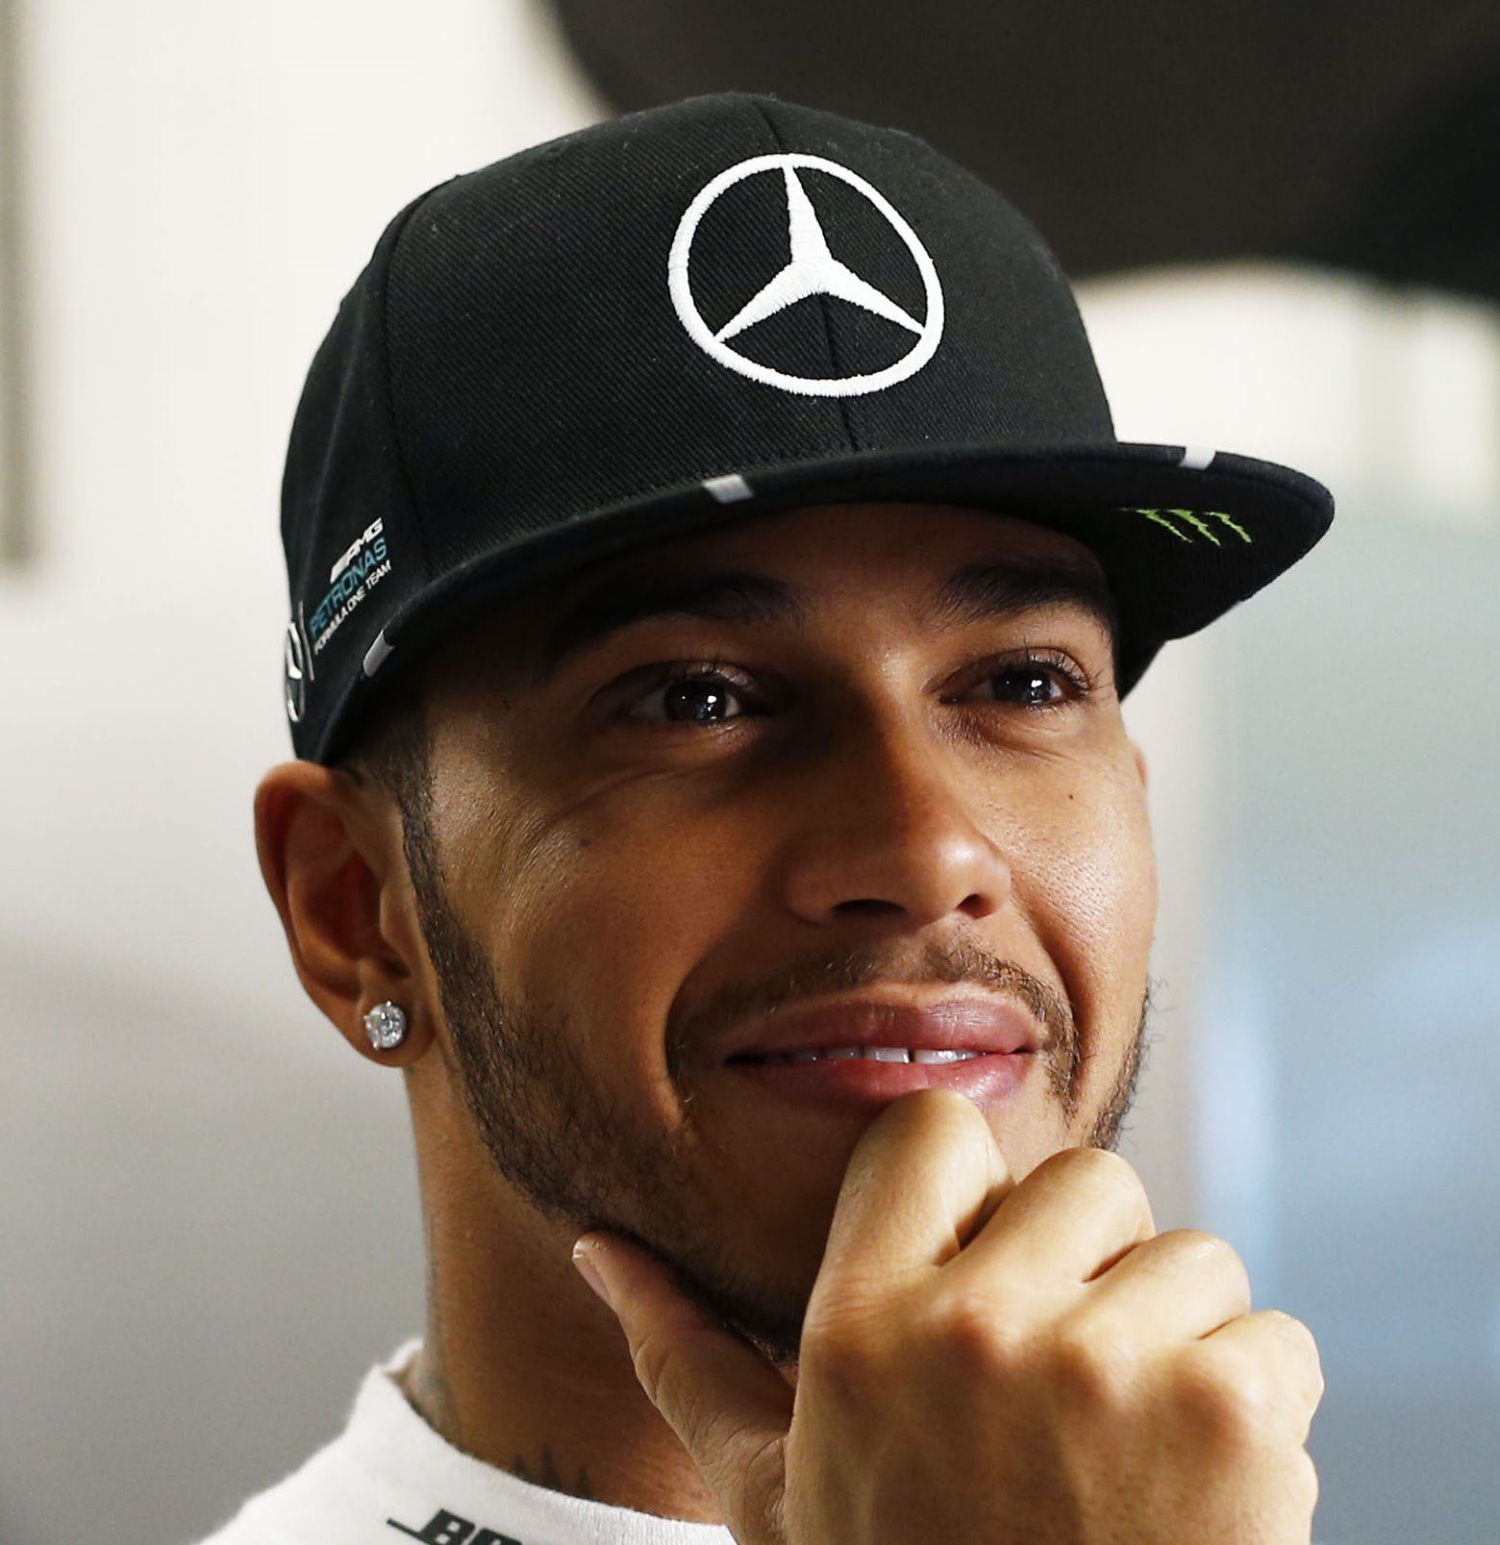 Lewis Hamilton smiling in Barcelona knowing the Aldo Costa Mercedes is probably unbeatable again